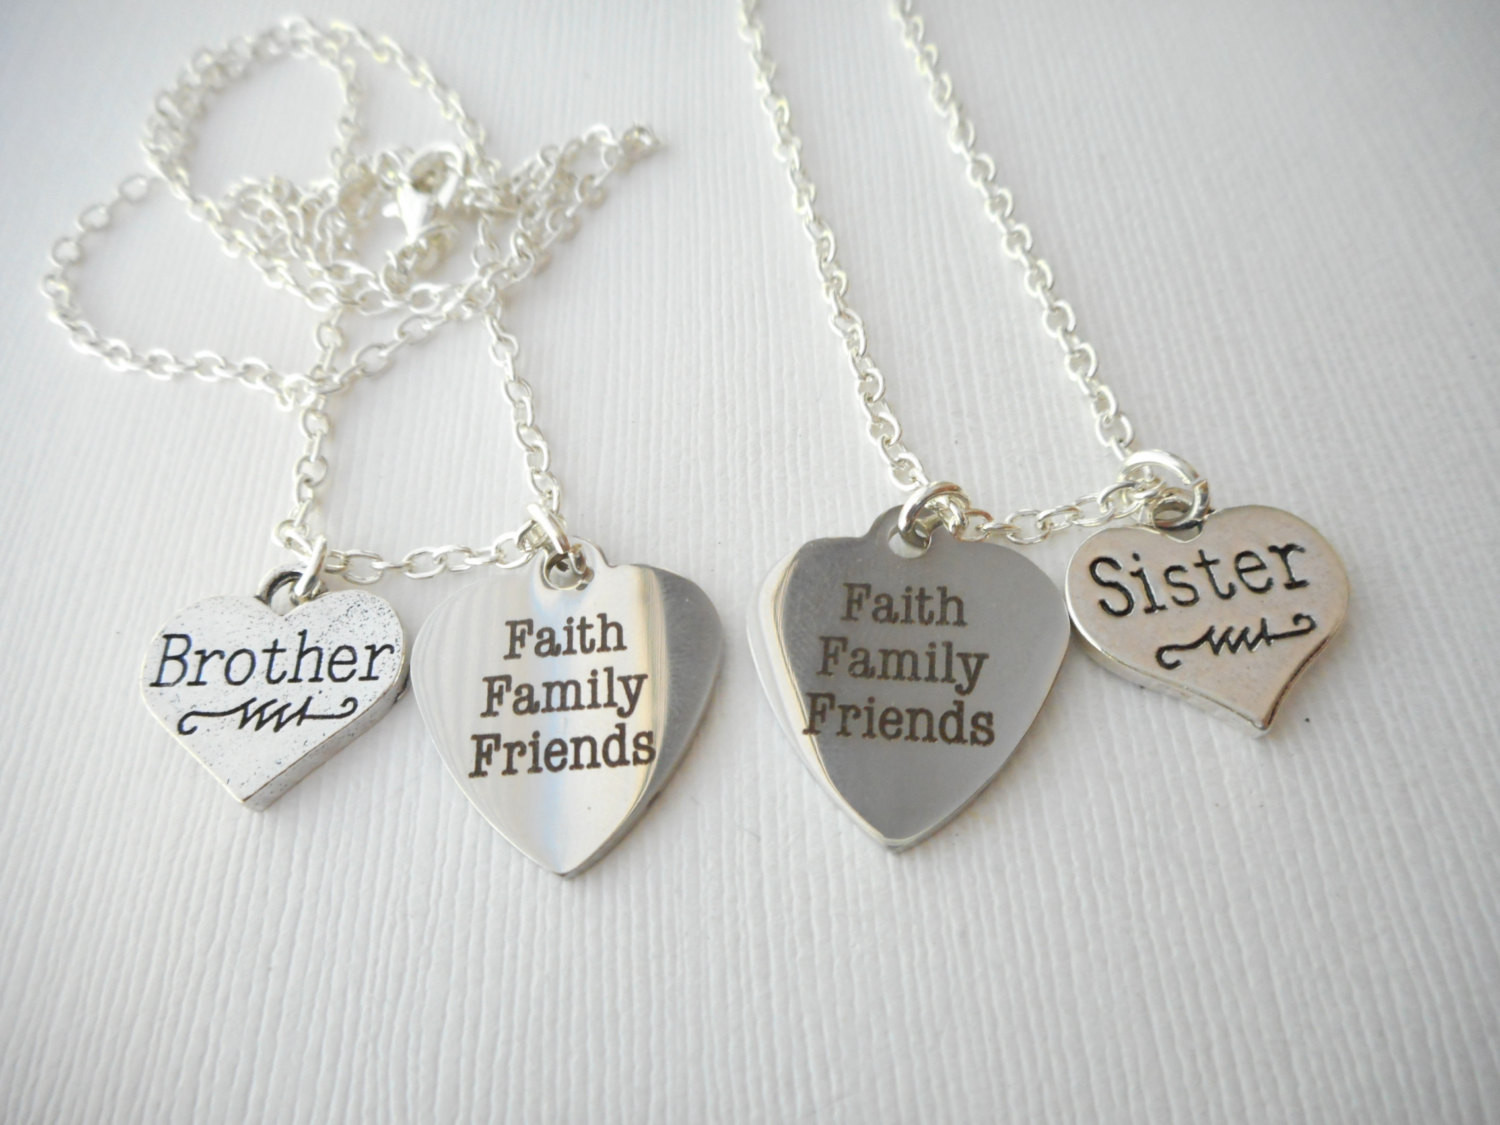 Brother And Sister Necklace
 2 Brother Sister Faith Family Friends Best Friend Necklaces